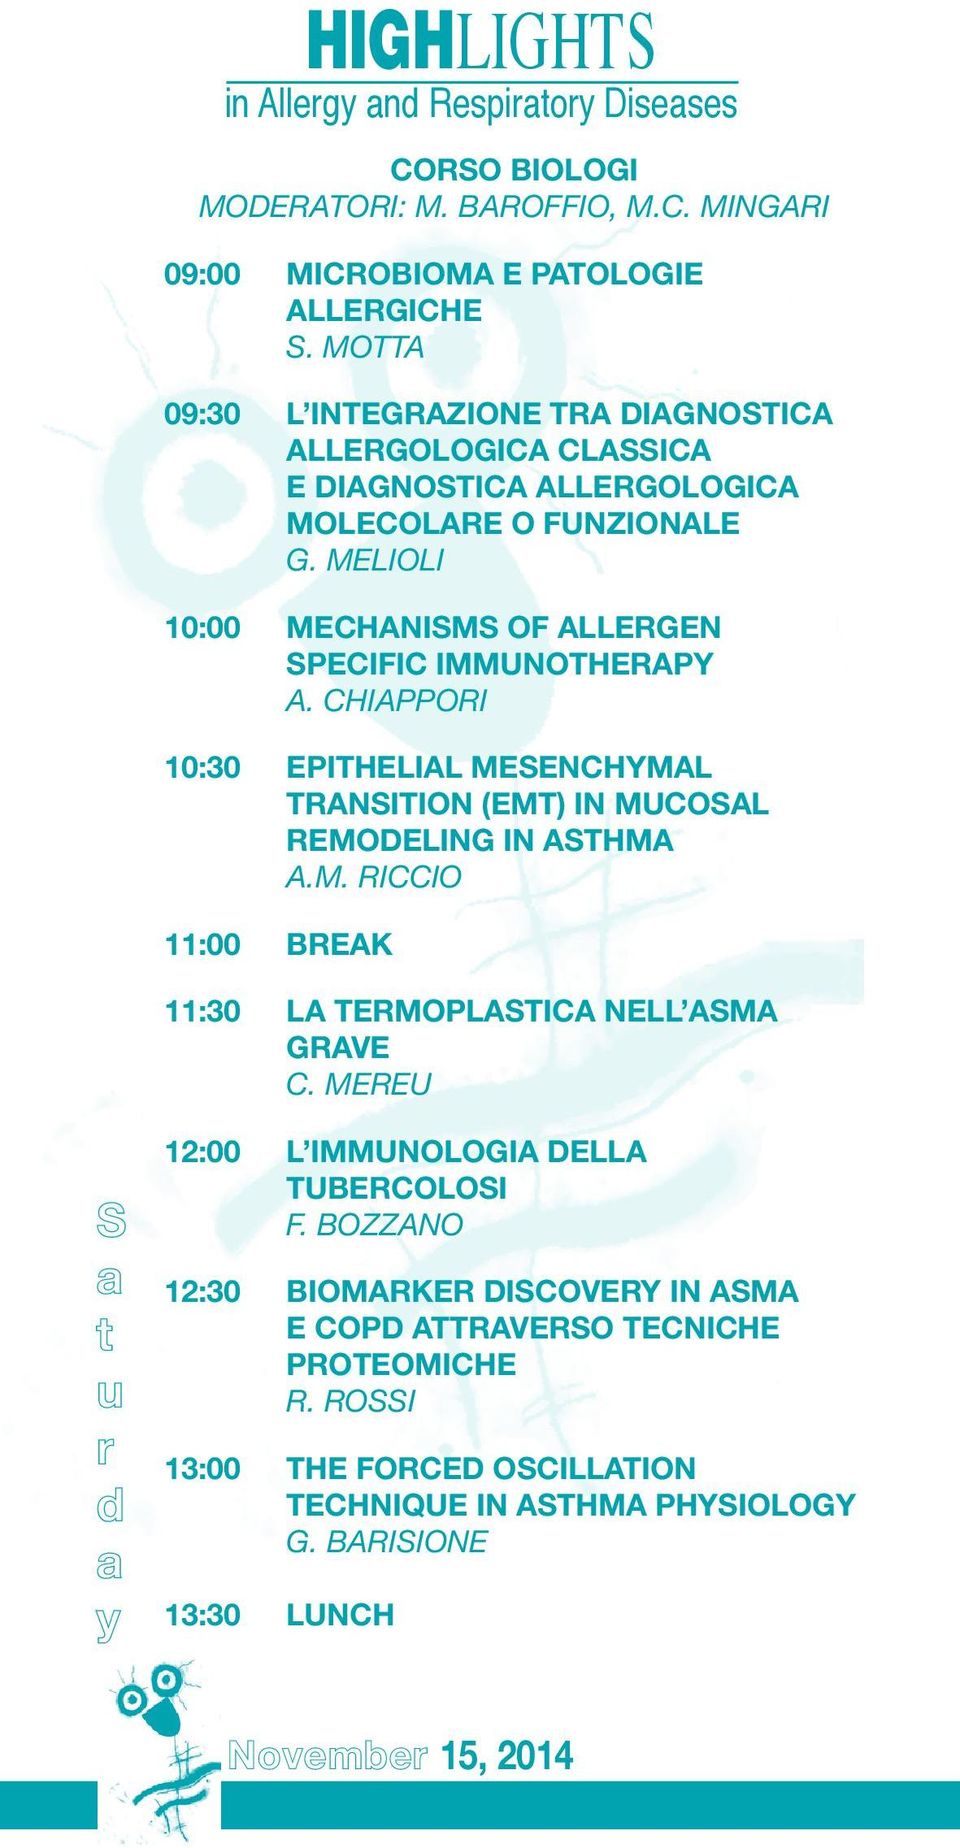 MELIOLI 10:00 MECHANISMS OF ALLERGEN SPECIFIC IMMUNOTHERAPY A. CHIAPPORI 10:30 EPITHELIAL MESENCHYMAL TRANSITION (EMT) IN MUCOSAL REMODELING IN ASTHMA A.M. RICCIO 11:00 BREAK 11:30 LA TERMOPLASTICA NELL ASMA GRAVE C.